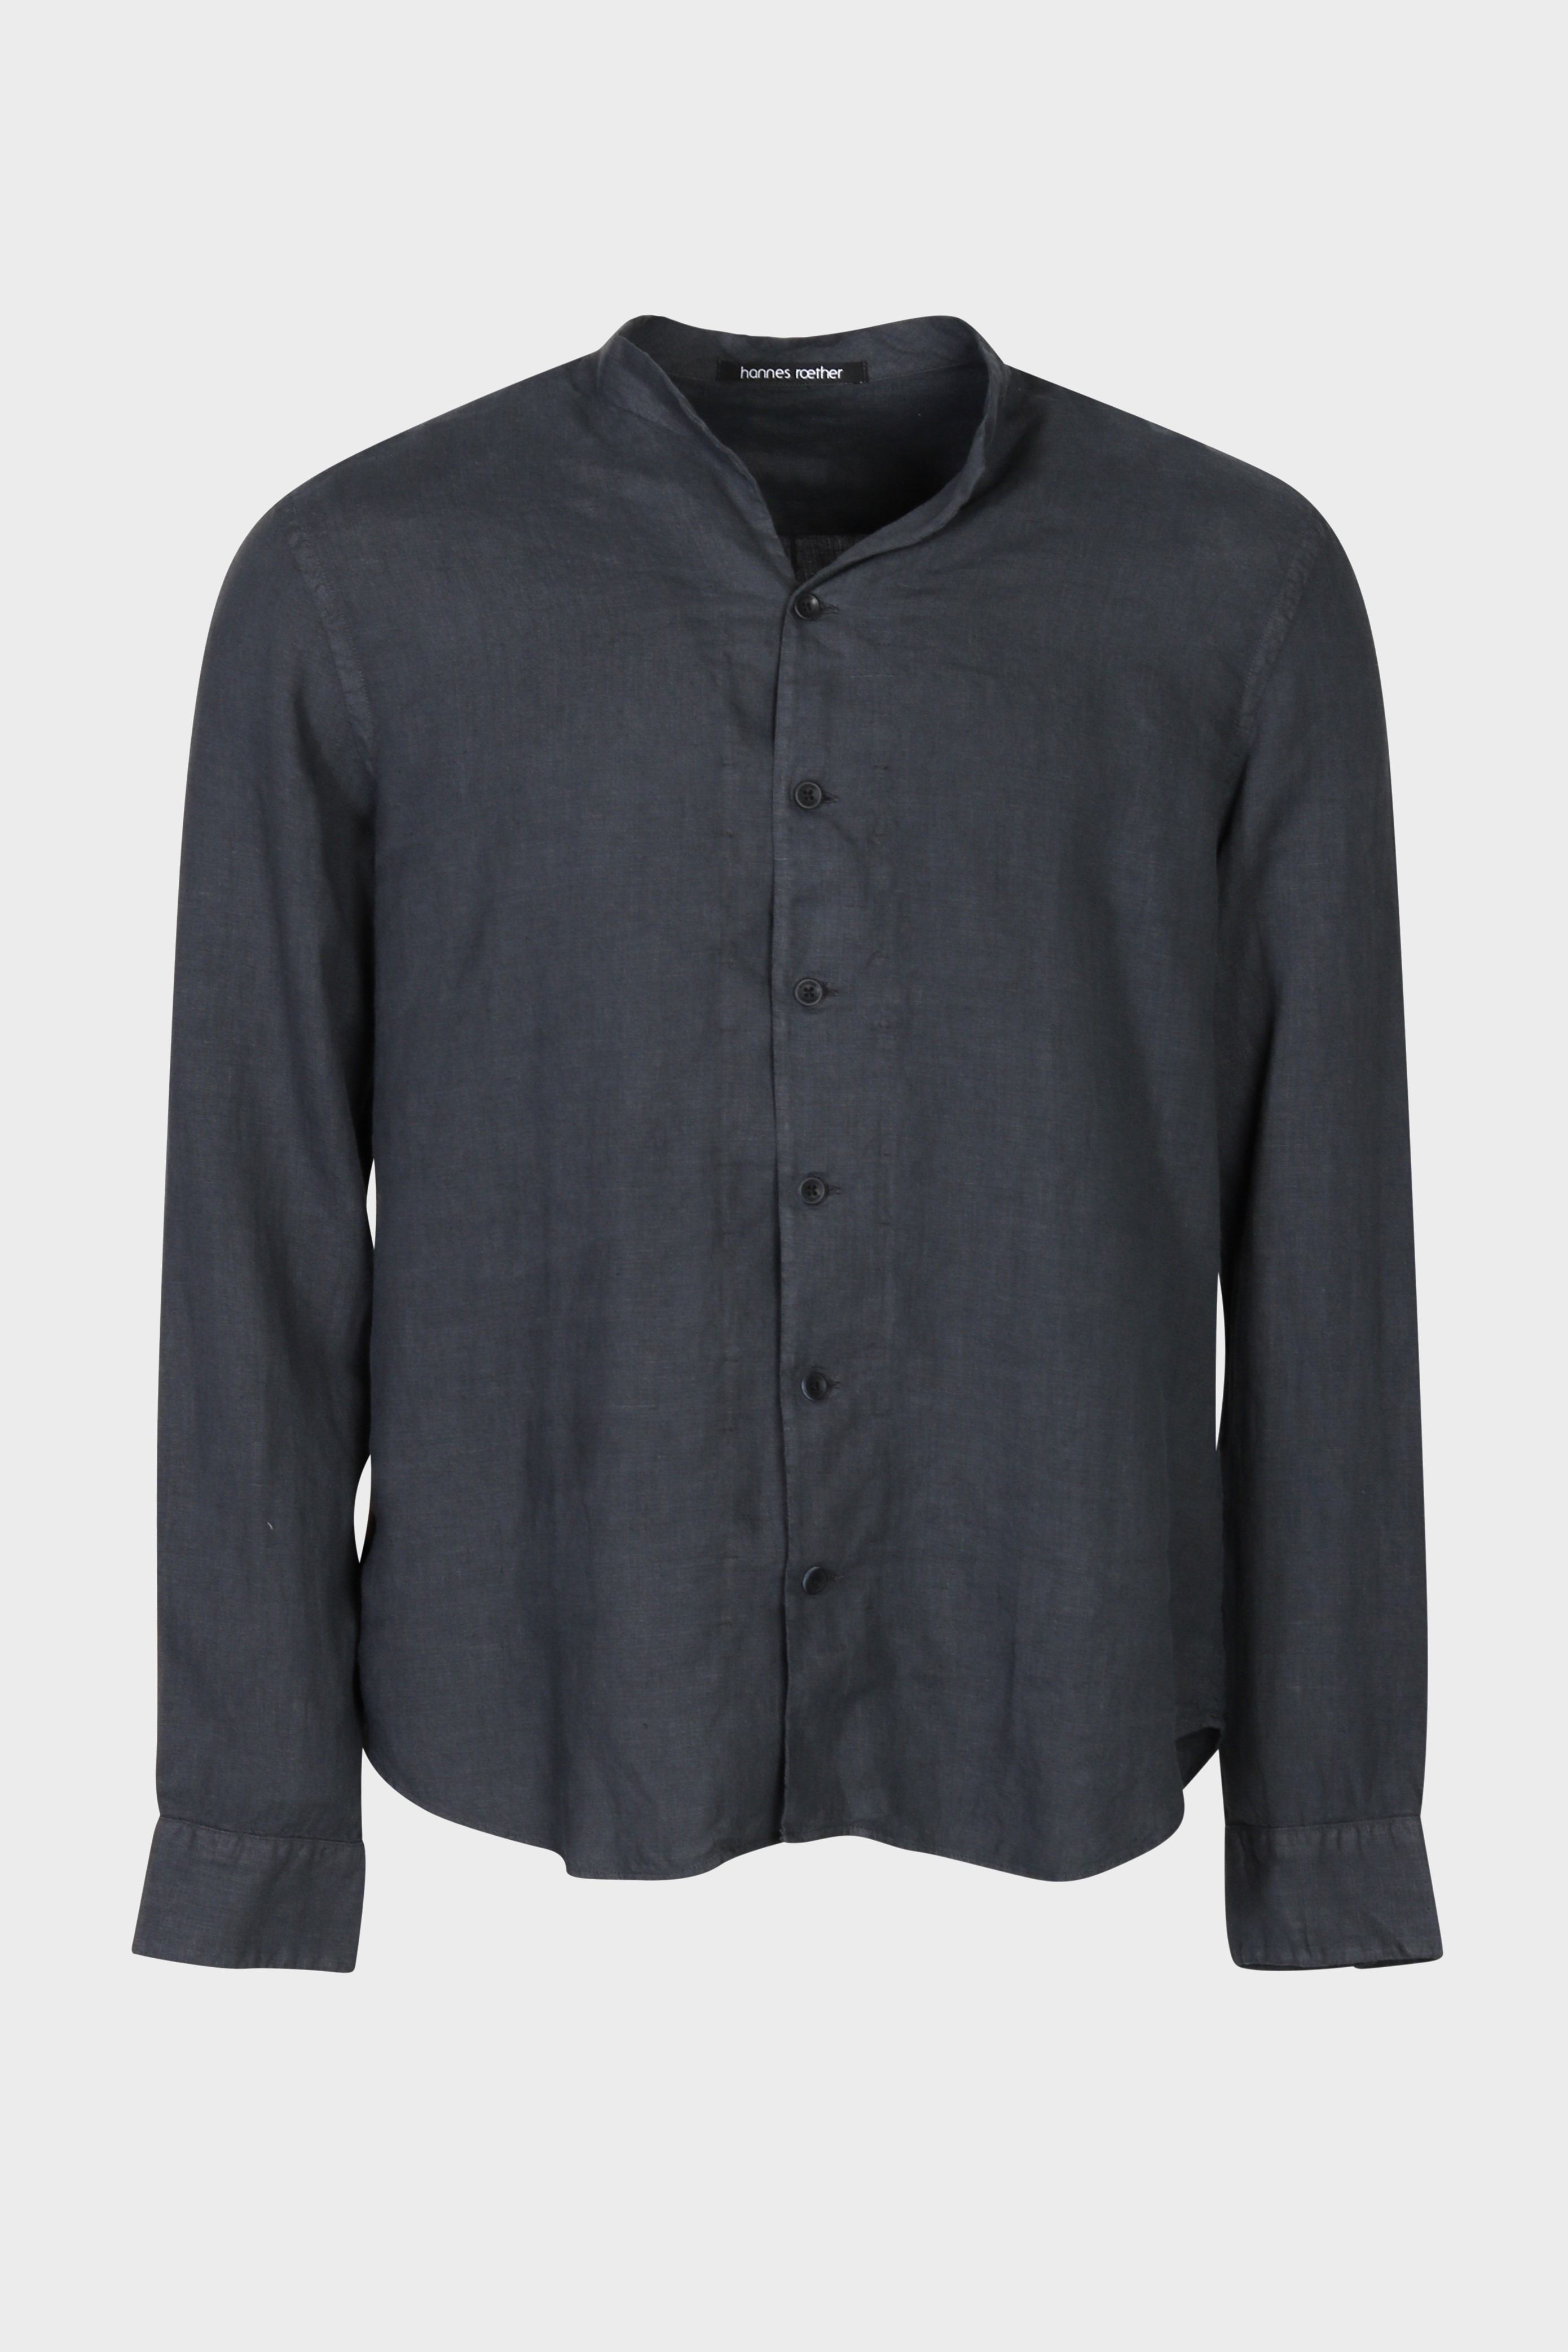 HANNES ROETHER Linen Shirt in Grey